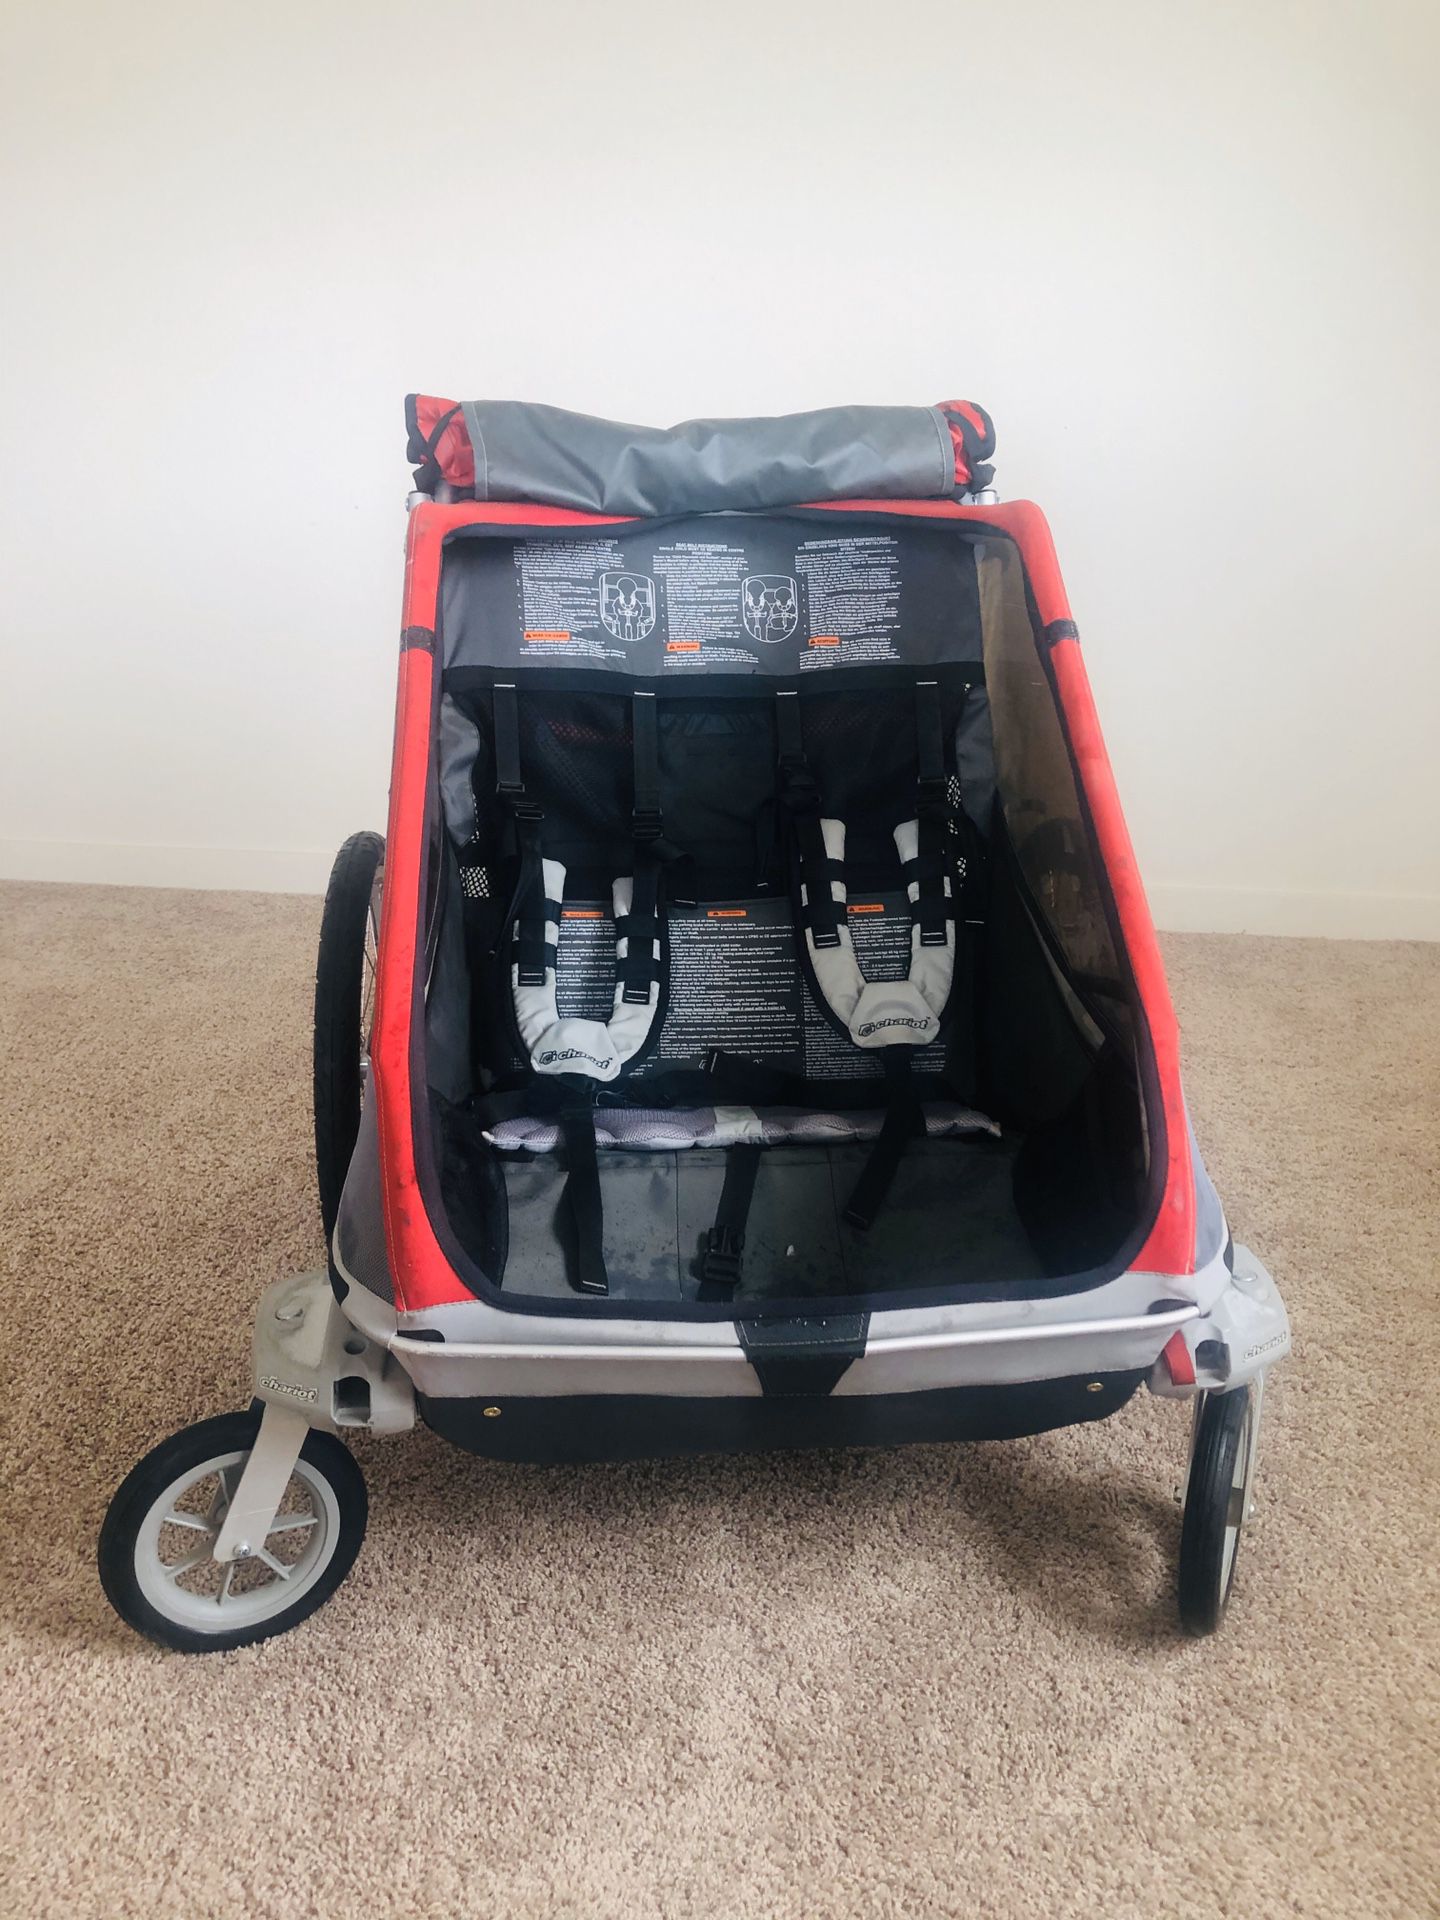 Double stroller, chariot couger, bike trailer